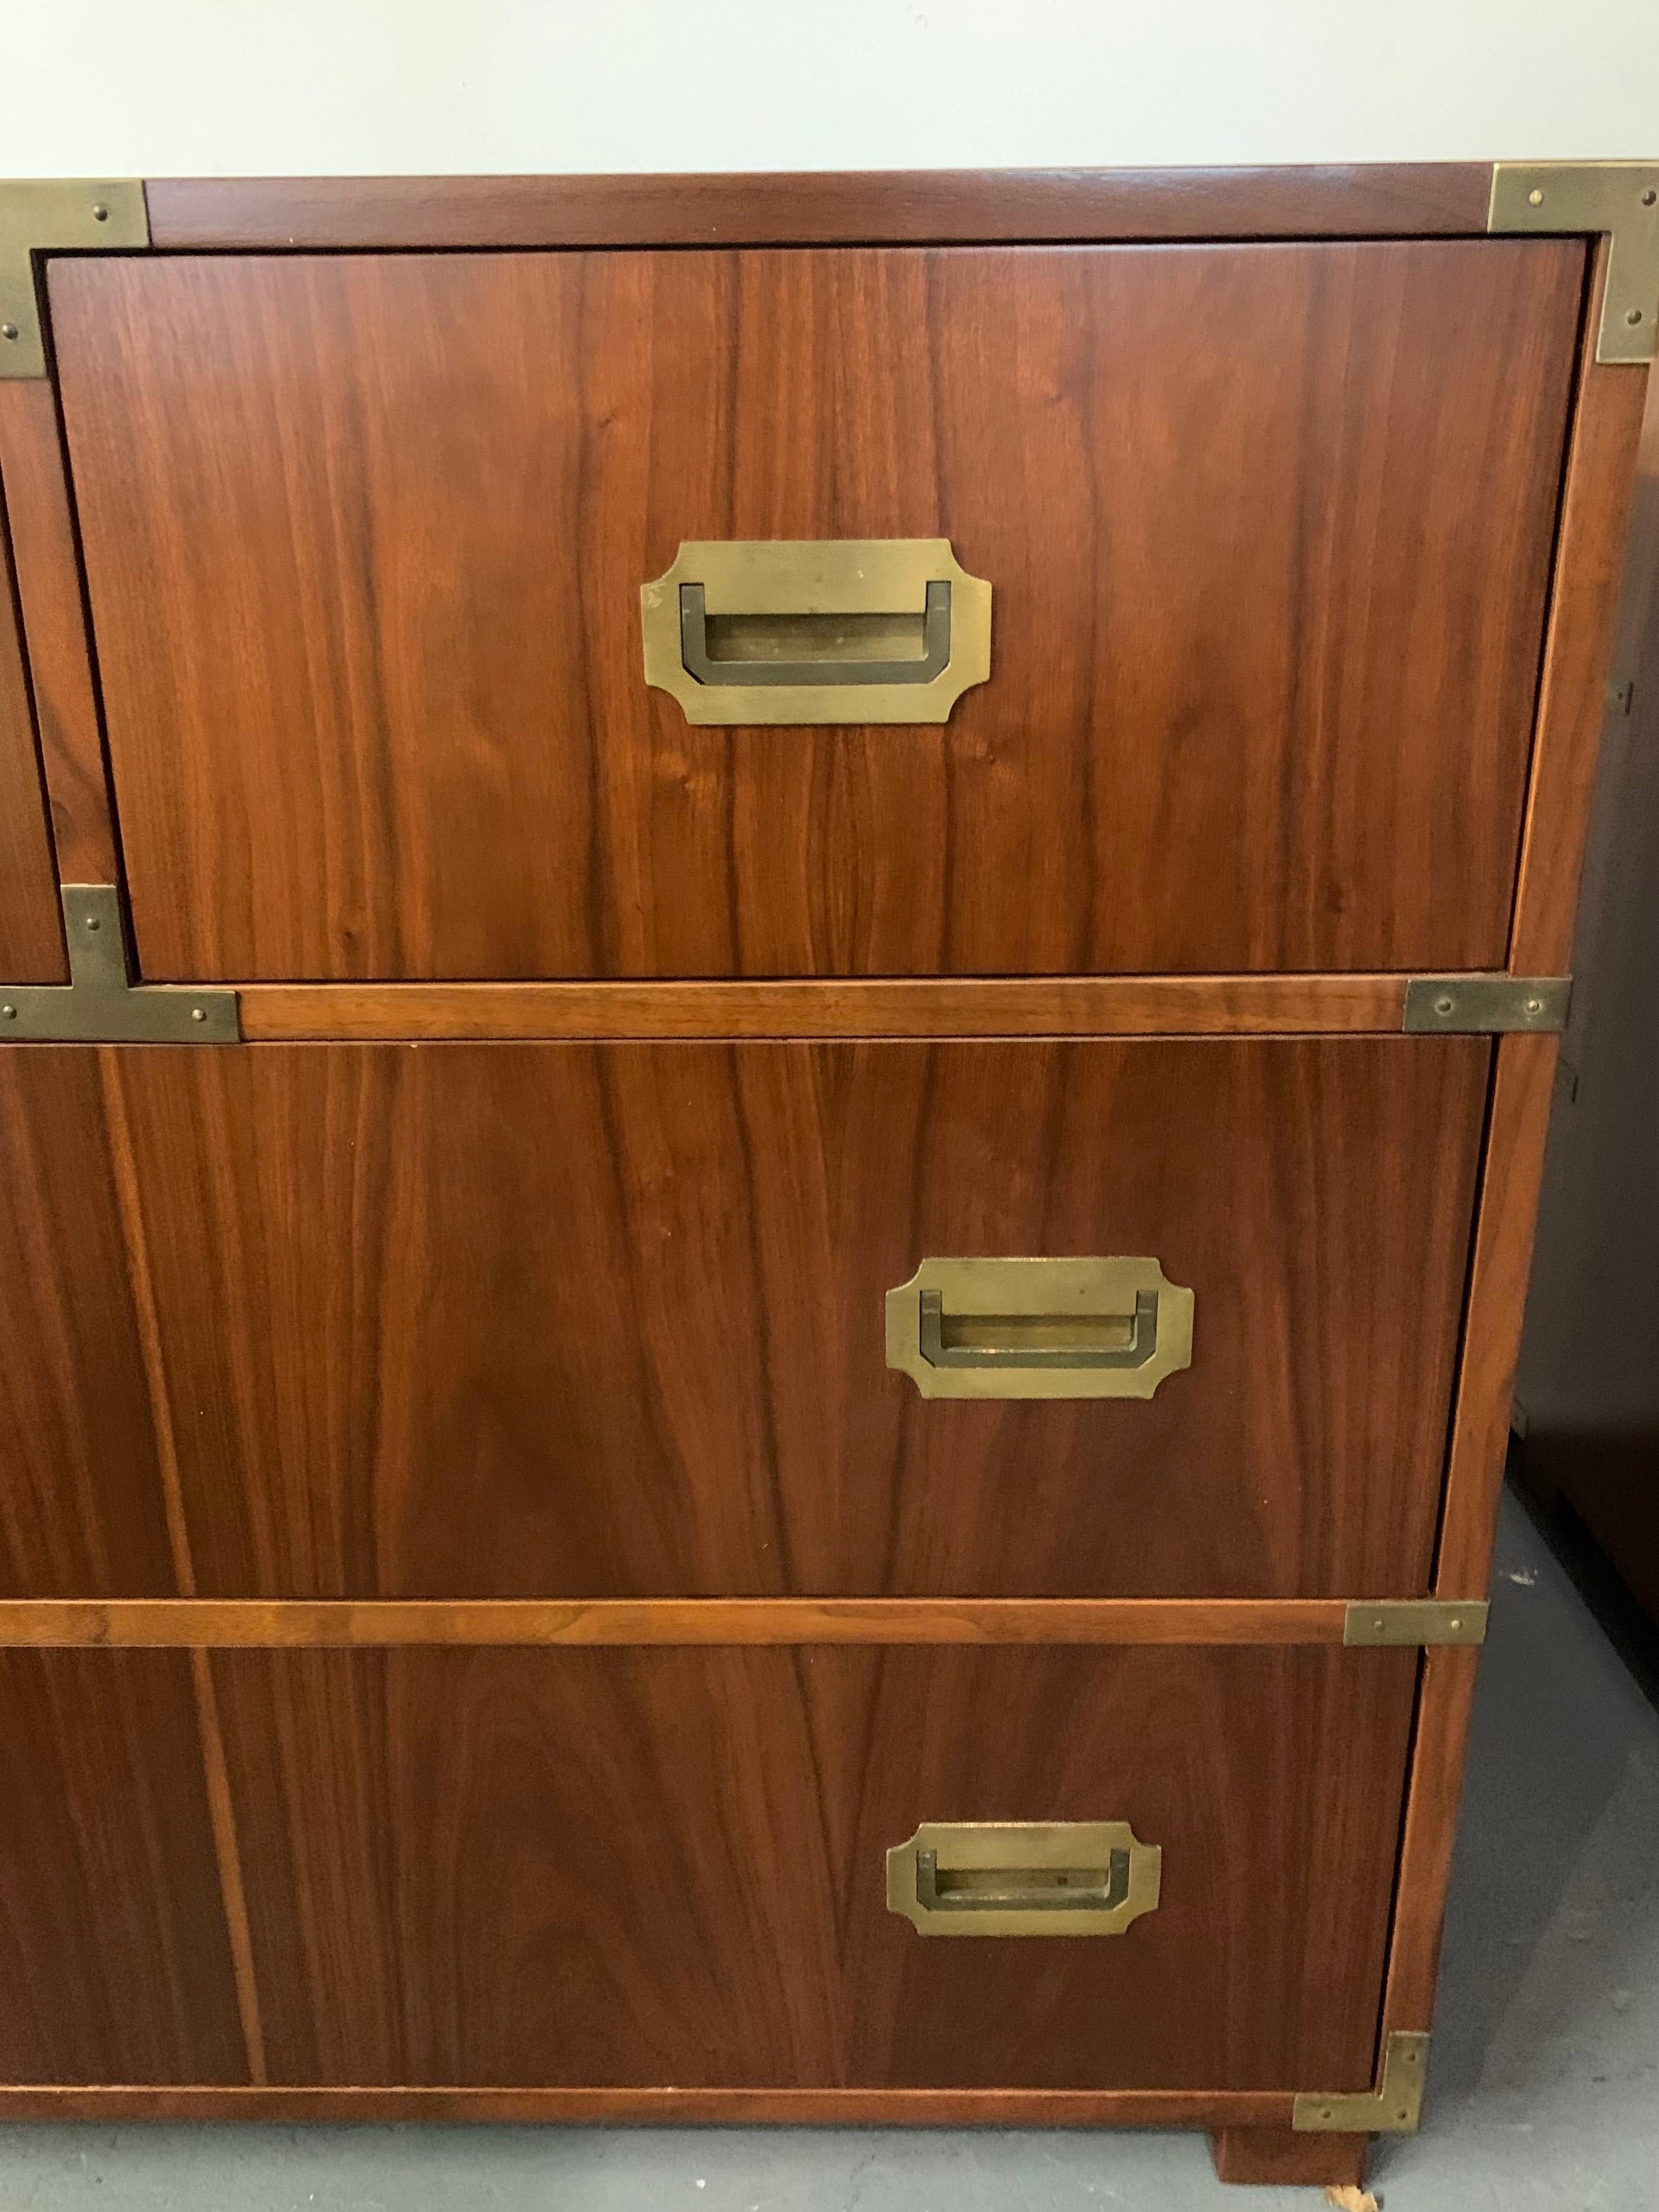 Handsome campaign style chest with four drawers and brass hardware and pulls. Baker medallion inside drawer. Note we also have the larger companion piece also available exclusively on 1stDibs this week. Own the best.